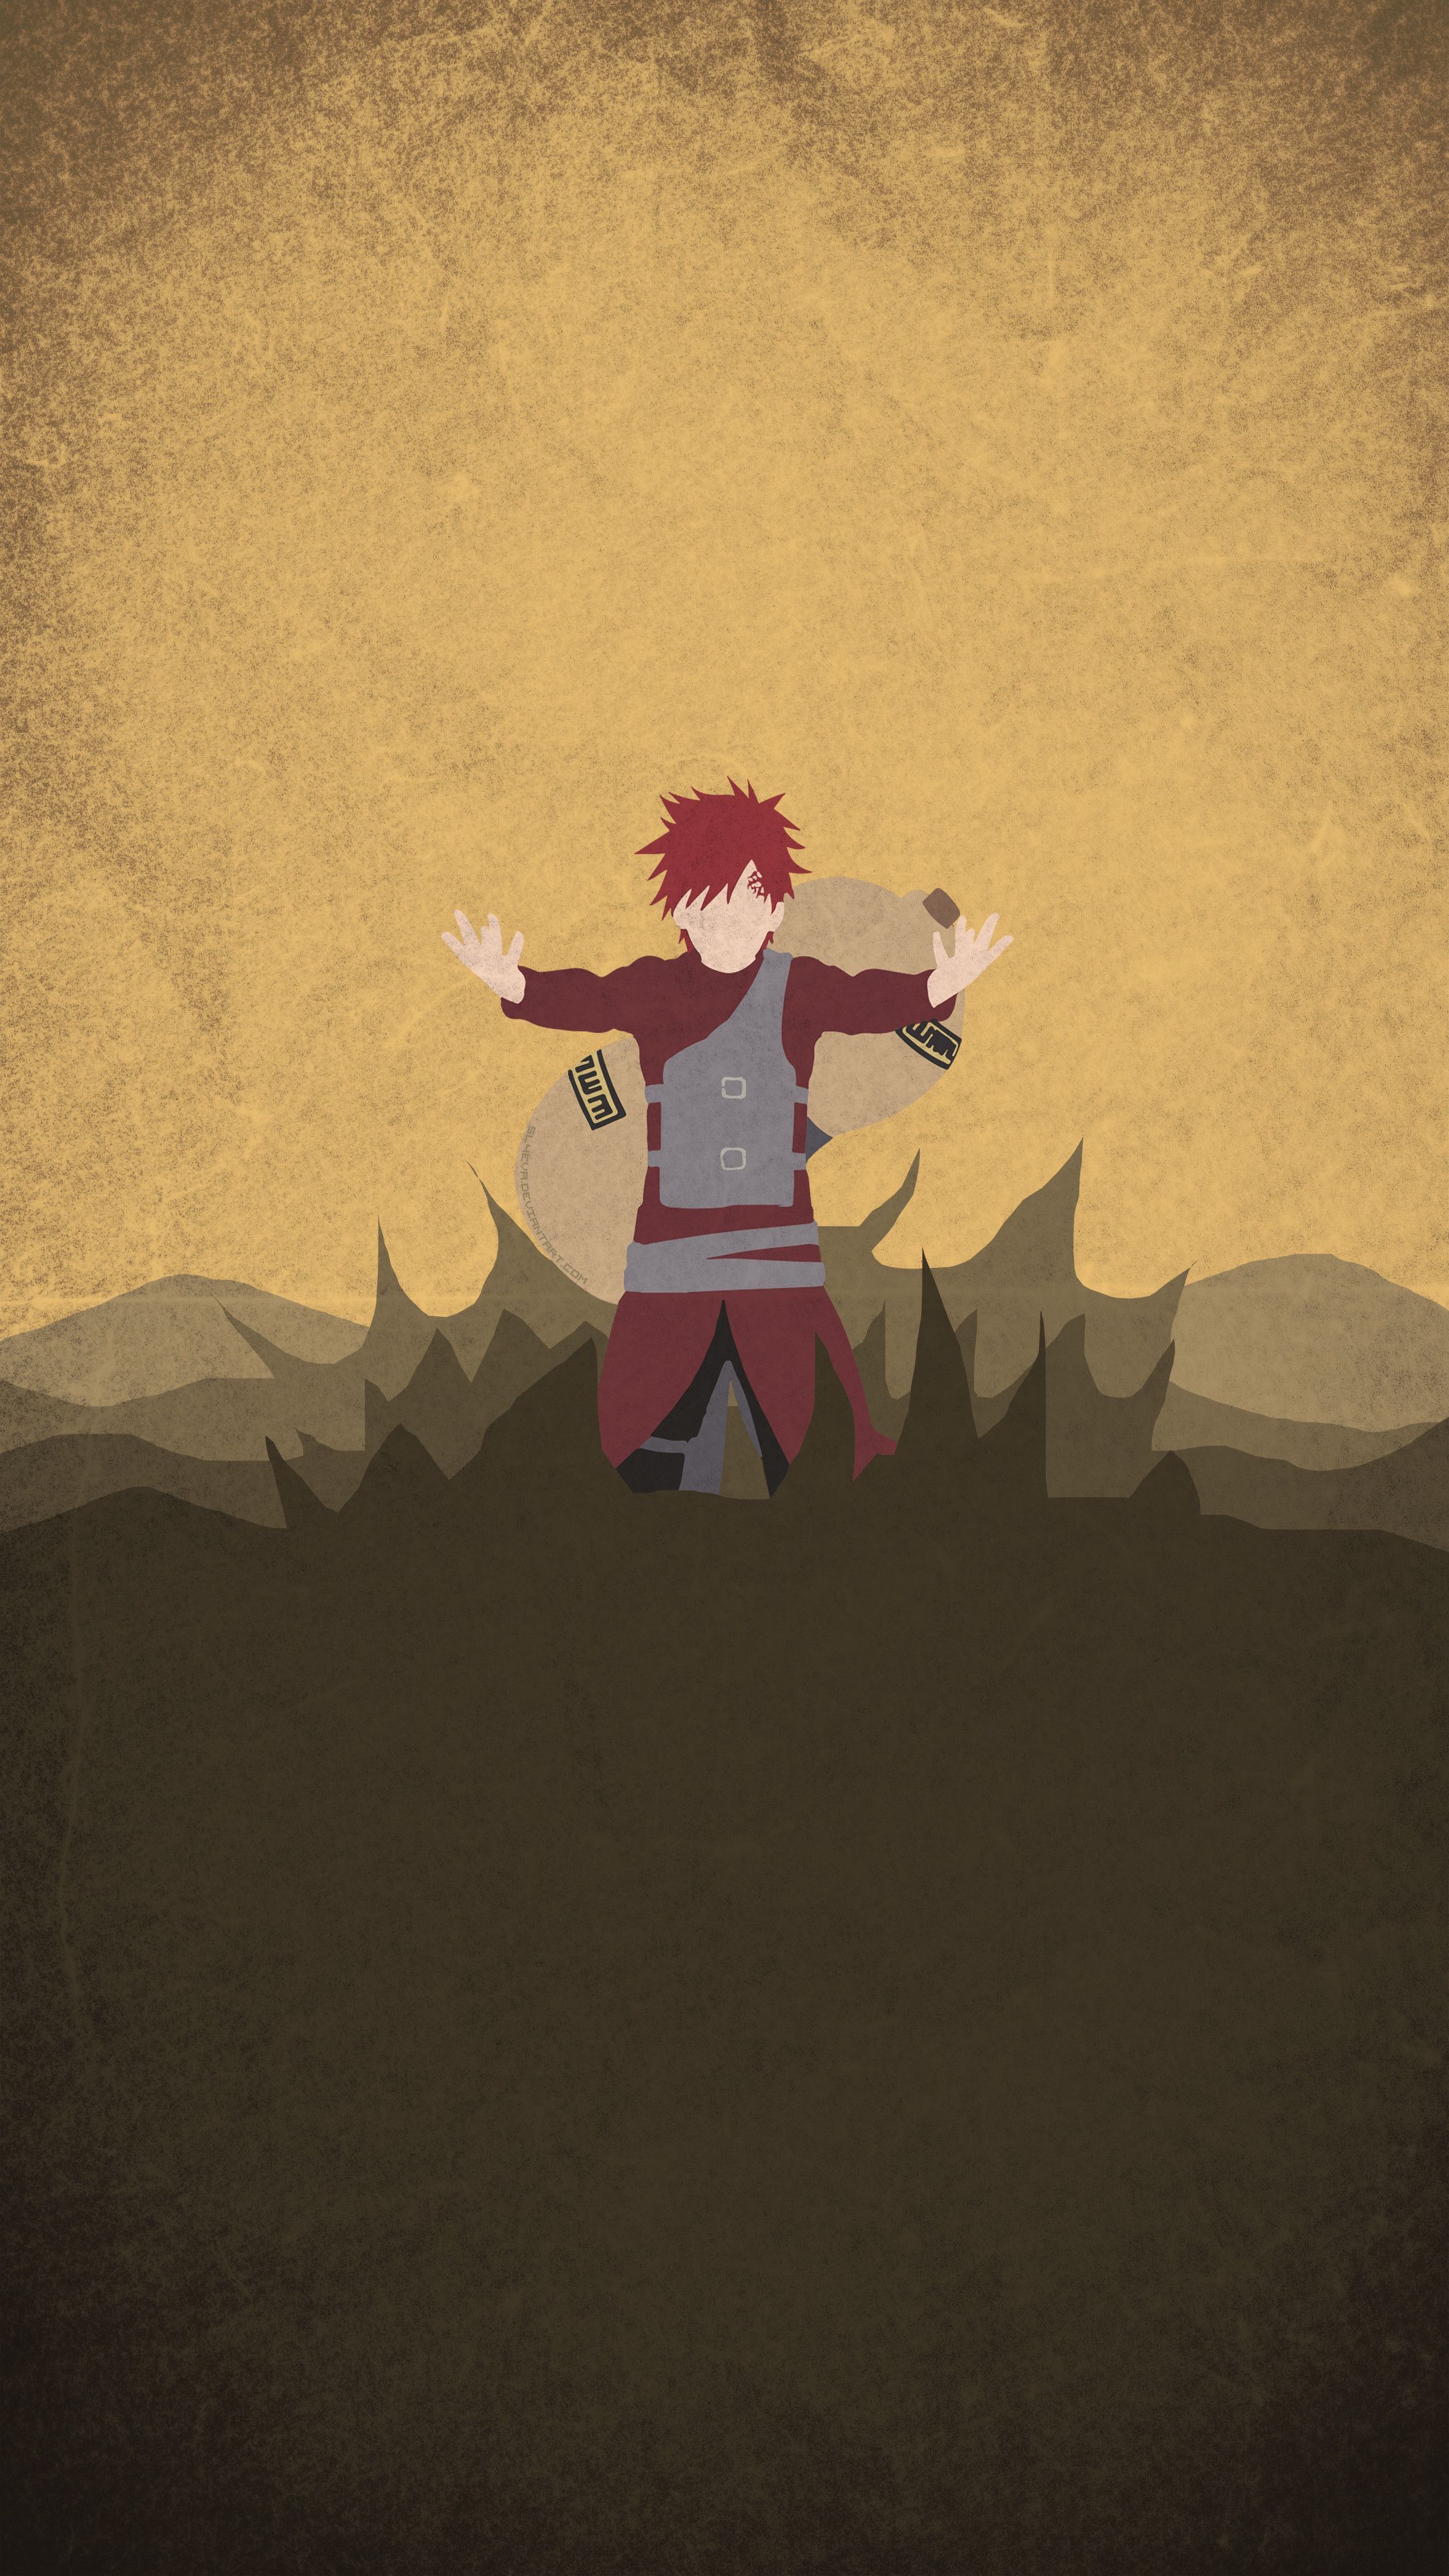 4K Gaara Wallpapers For iPhone Android and Desktop  Page 7 of 7  The  RamenSwag